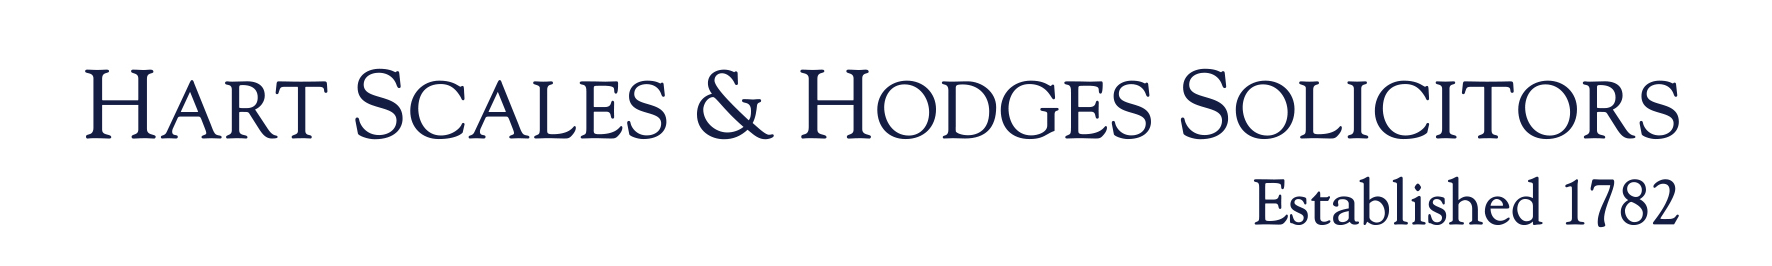 Hart Scales and Hodges Approved Logo.jpg